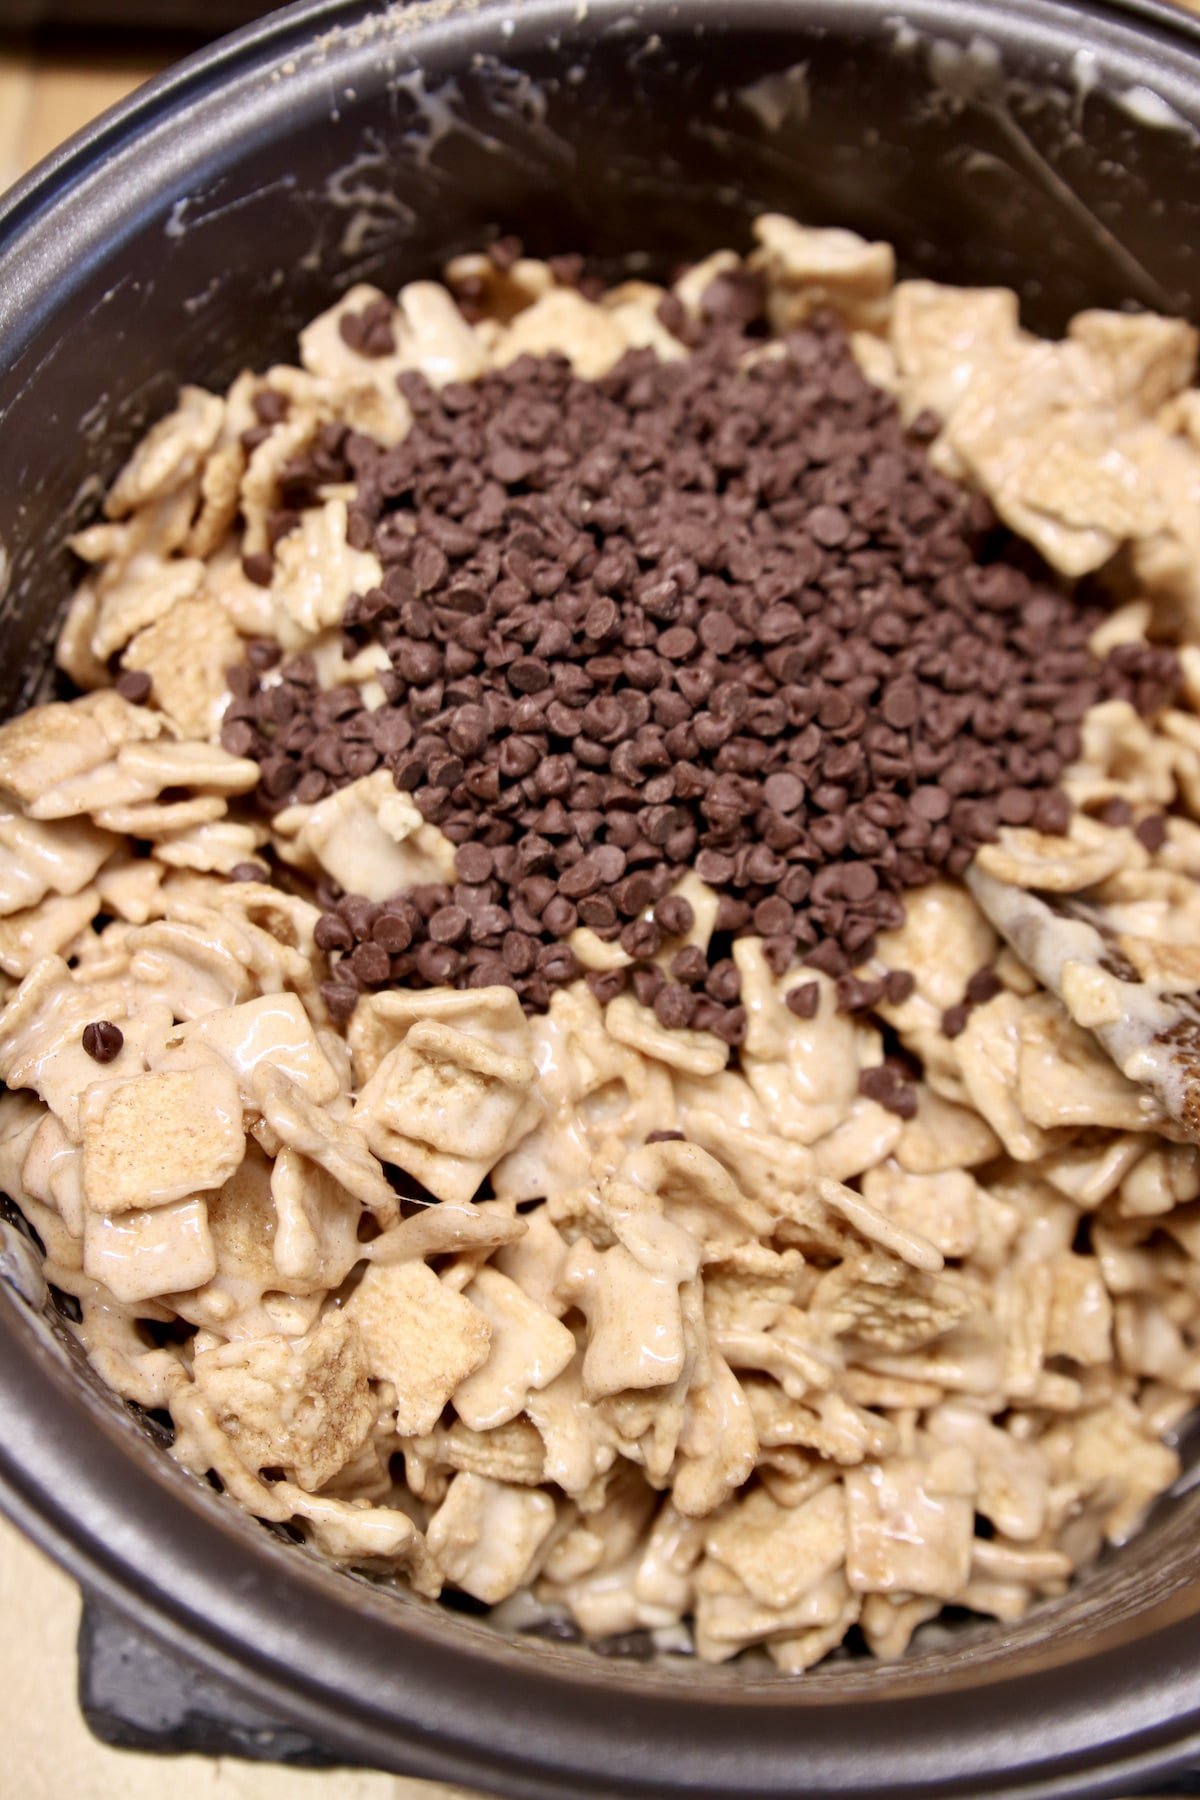 Adding chocolate chips to cereal marshmallow treats.